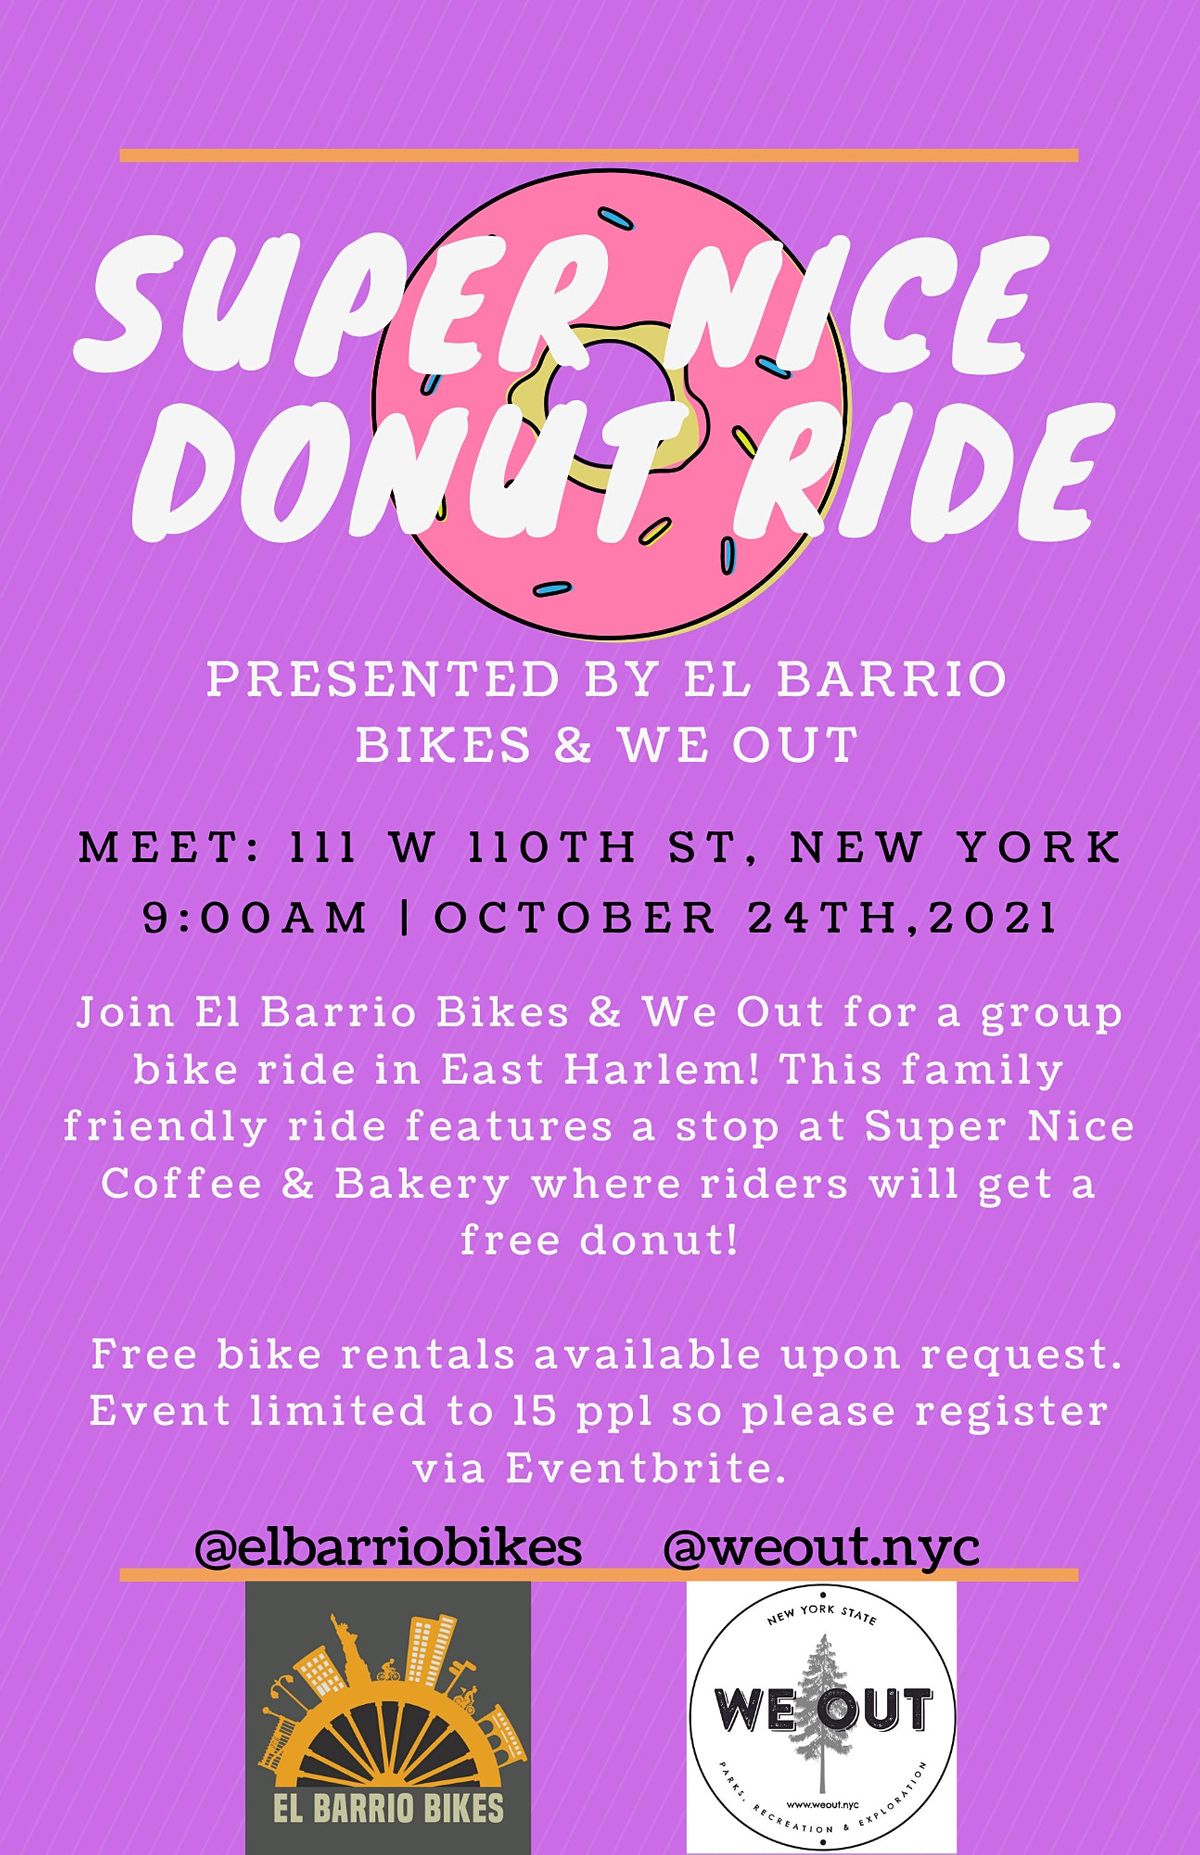 El Barrio Bikes x We Out: Super Nice Donut Ride